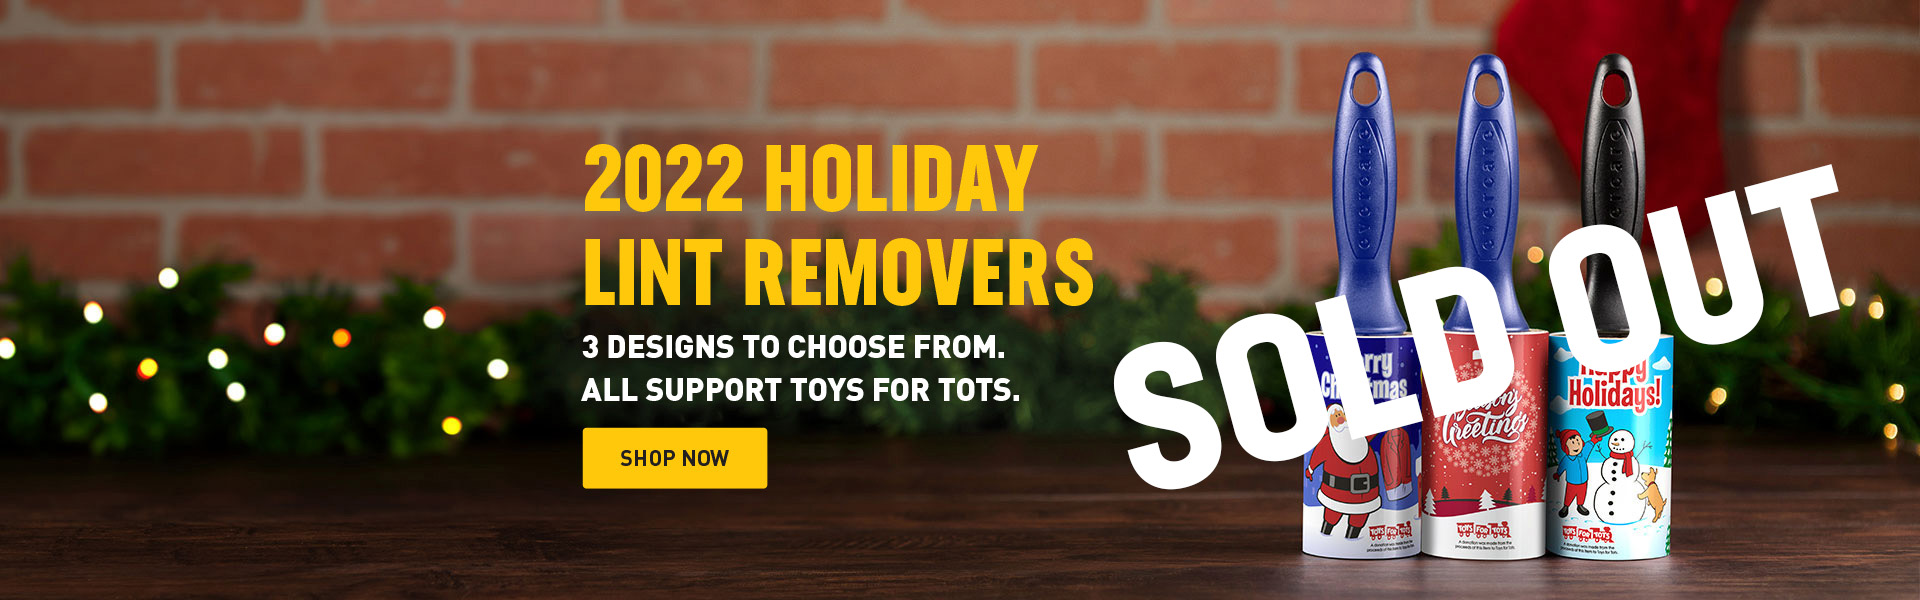 2022 Holiday Lint Removers | 2022 Holiday Lint Rollers | Cleaner's Supply Toys for Tots Lint Rollers